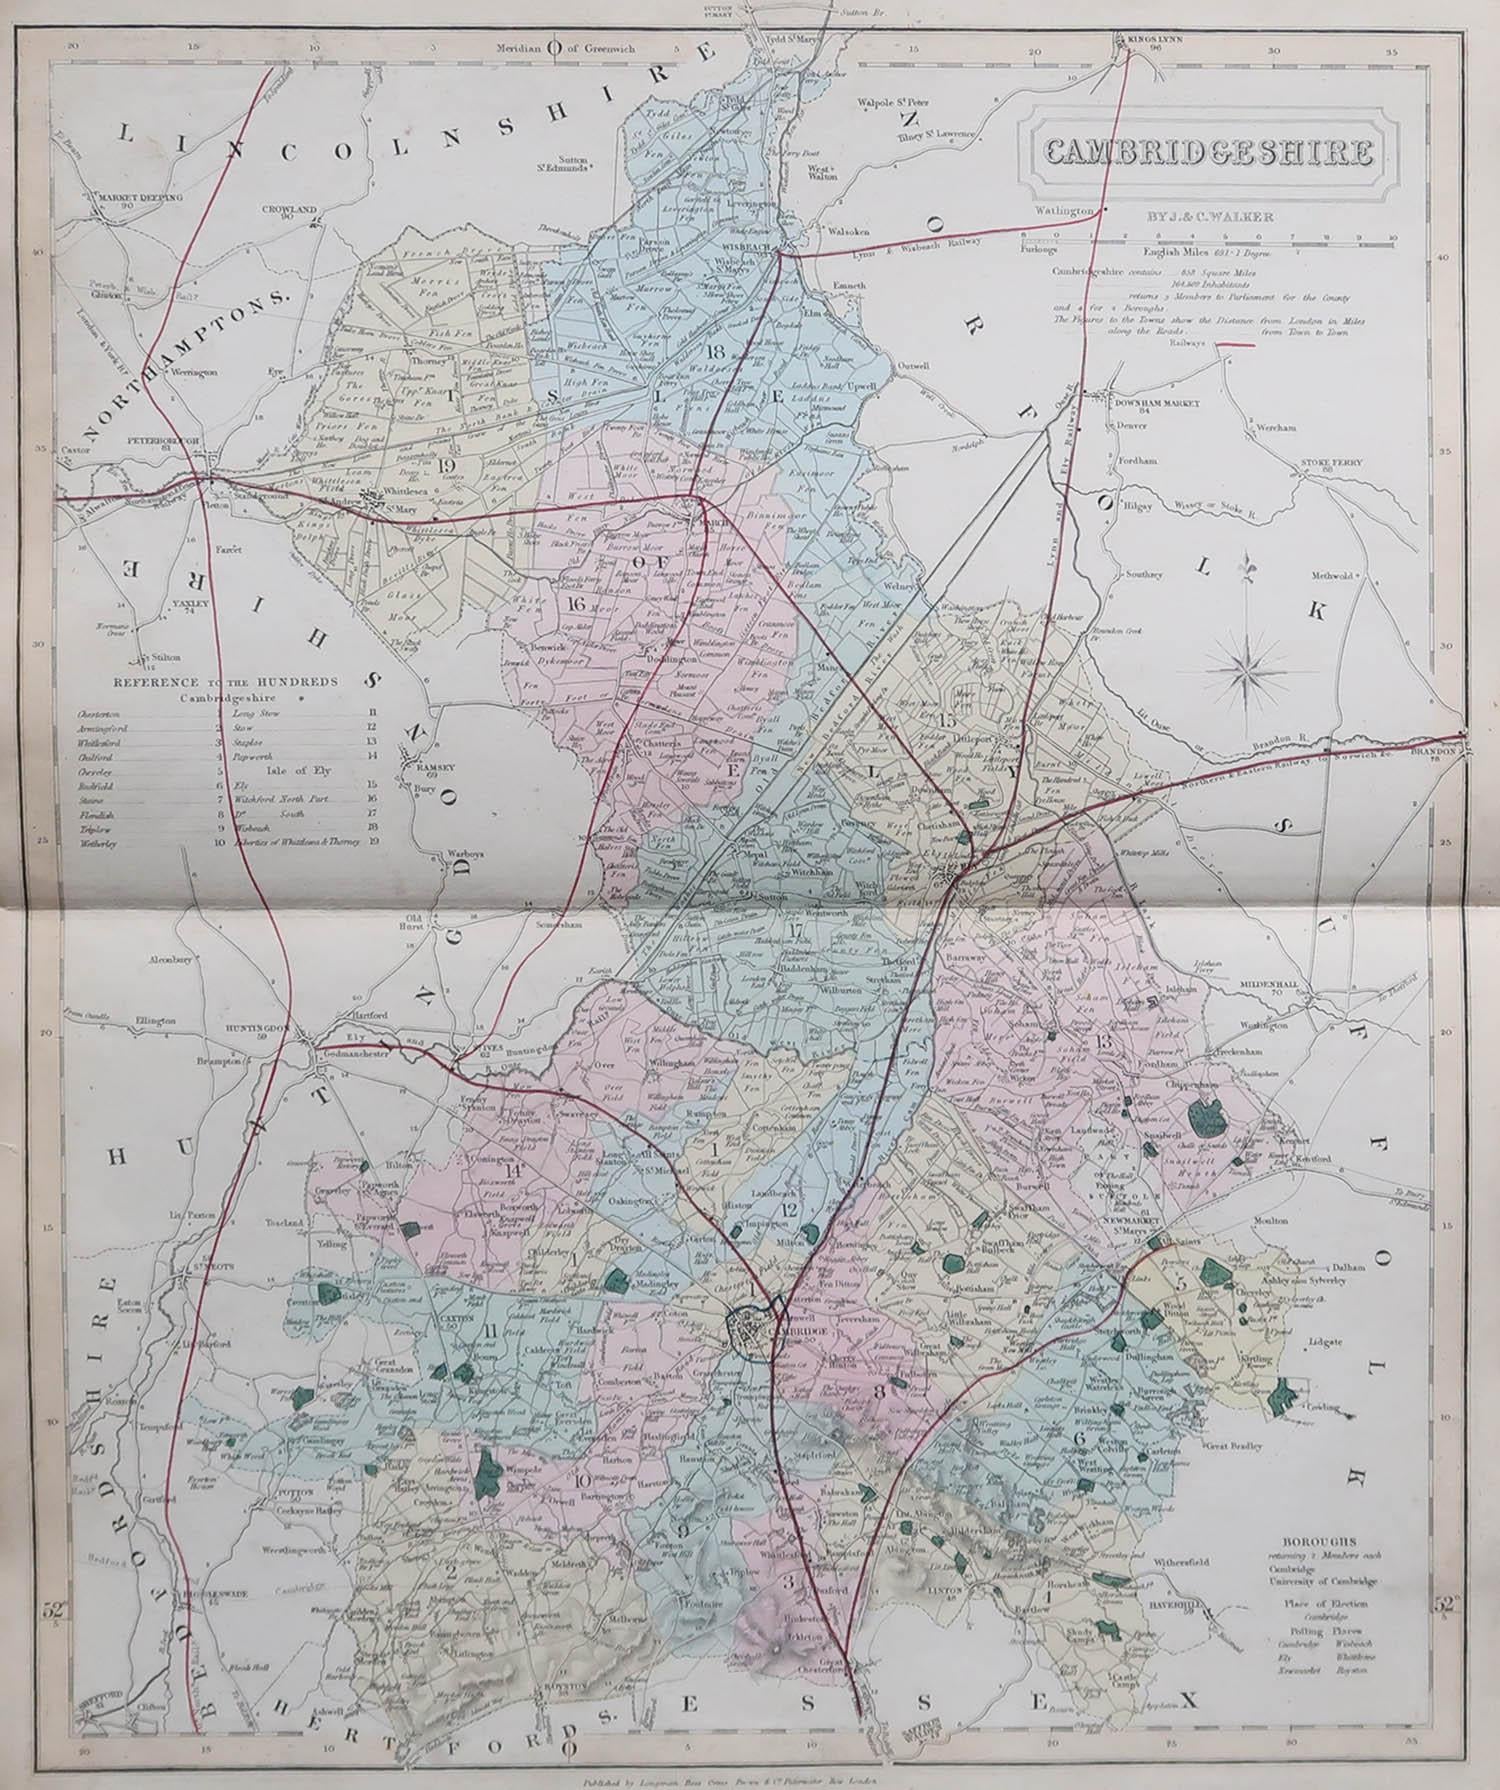 Great map of Cambridgeshire

Original colour

By J & C Walker

Published by Longman, Rees, Orme, Brown & Co. 1851

Unframed.




